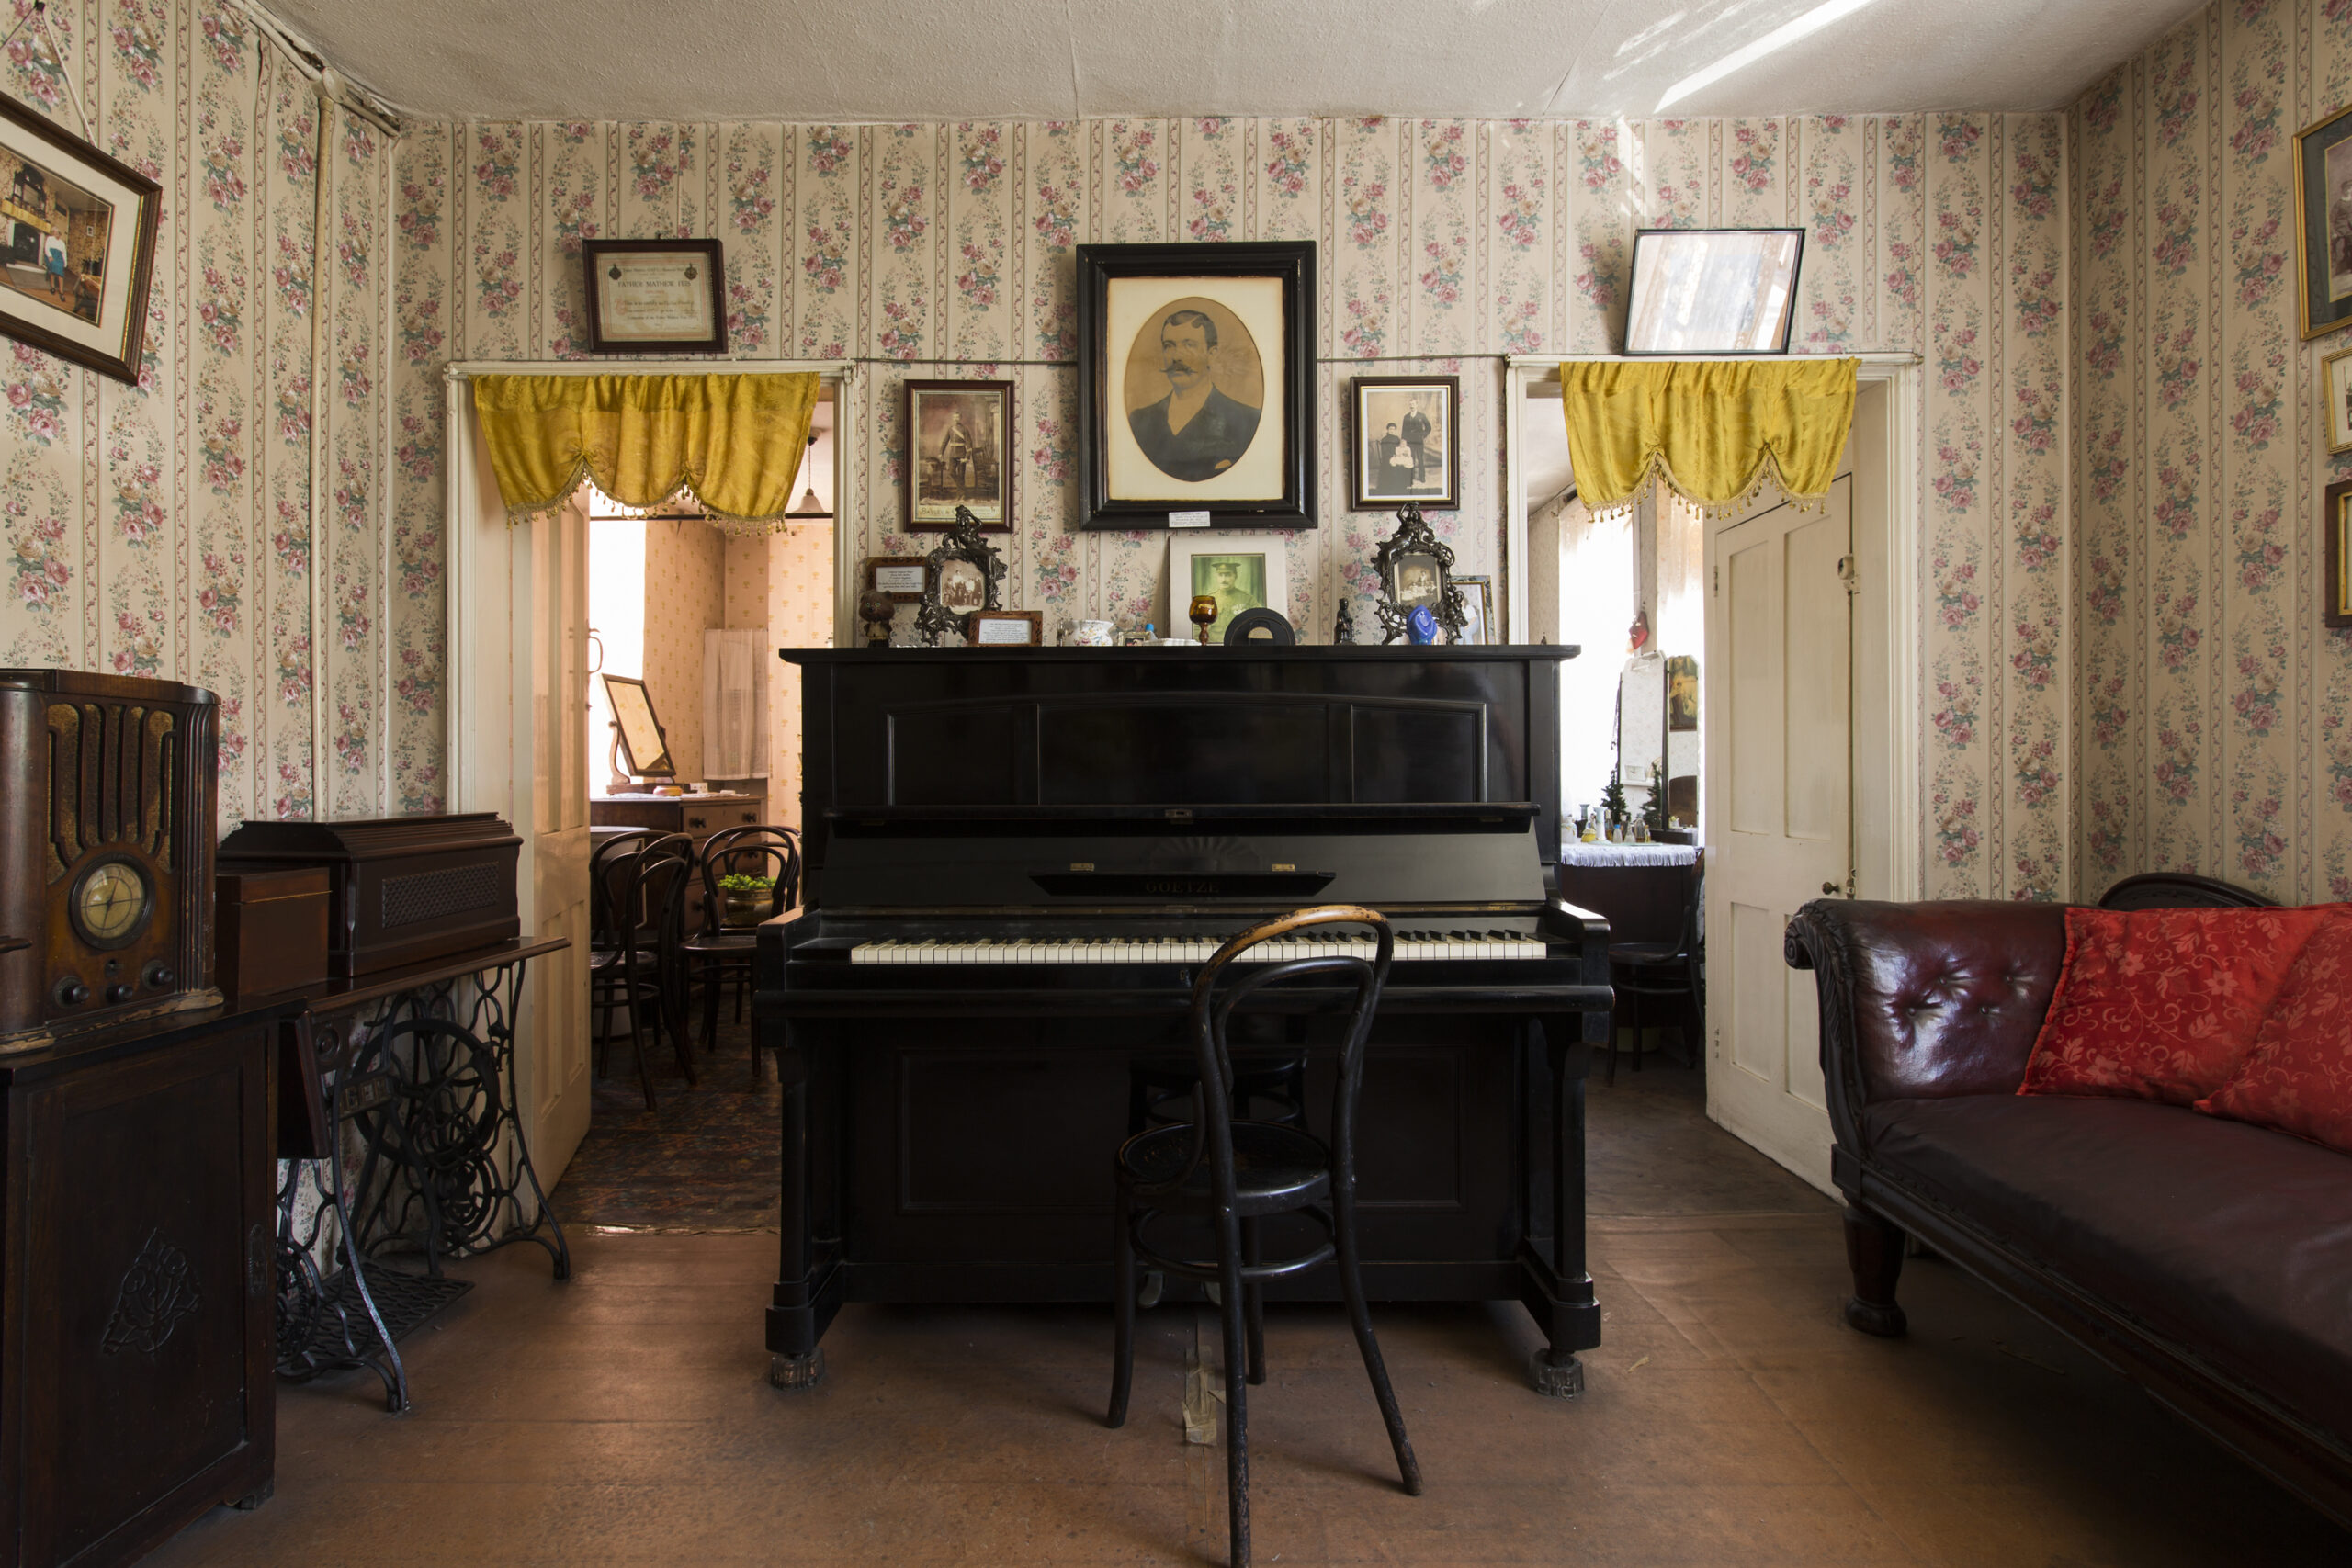 Interior view of living room with upright piano on the centre. The walls are covered with wallpaper with yellow flowers and portraits